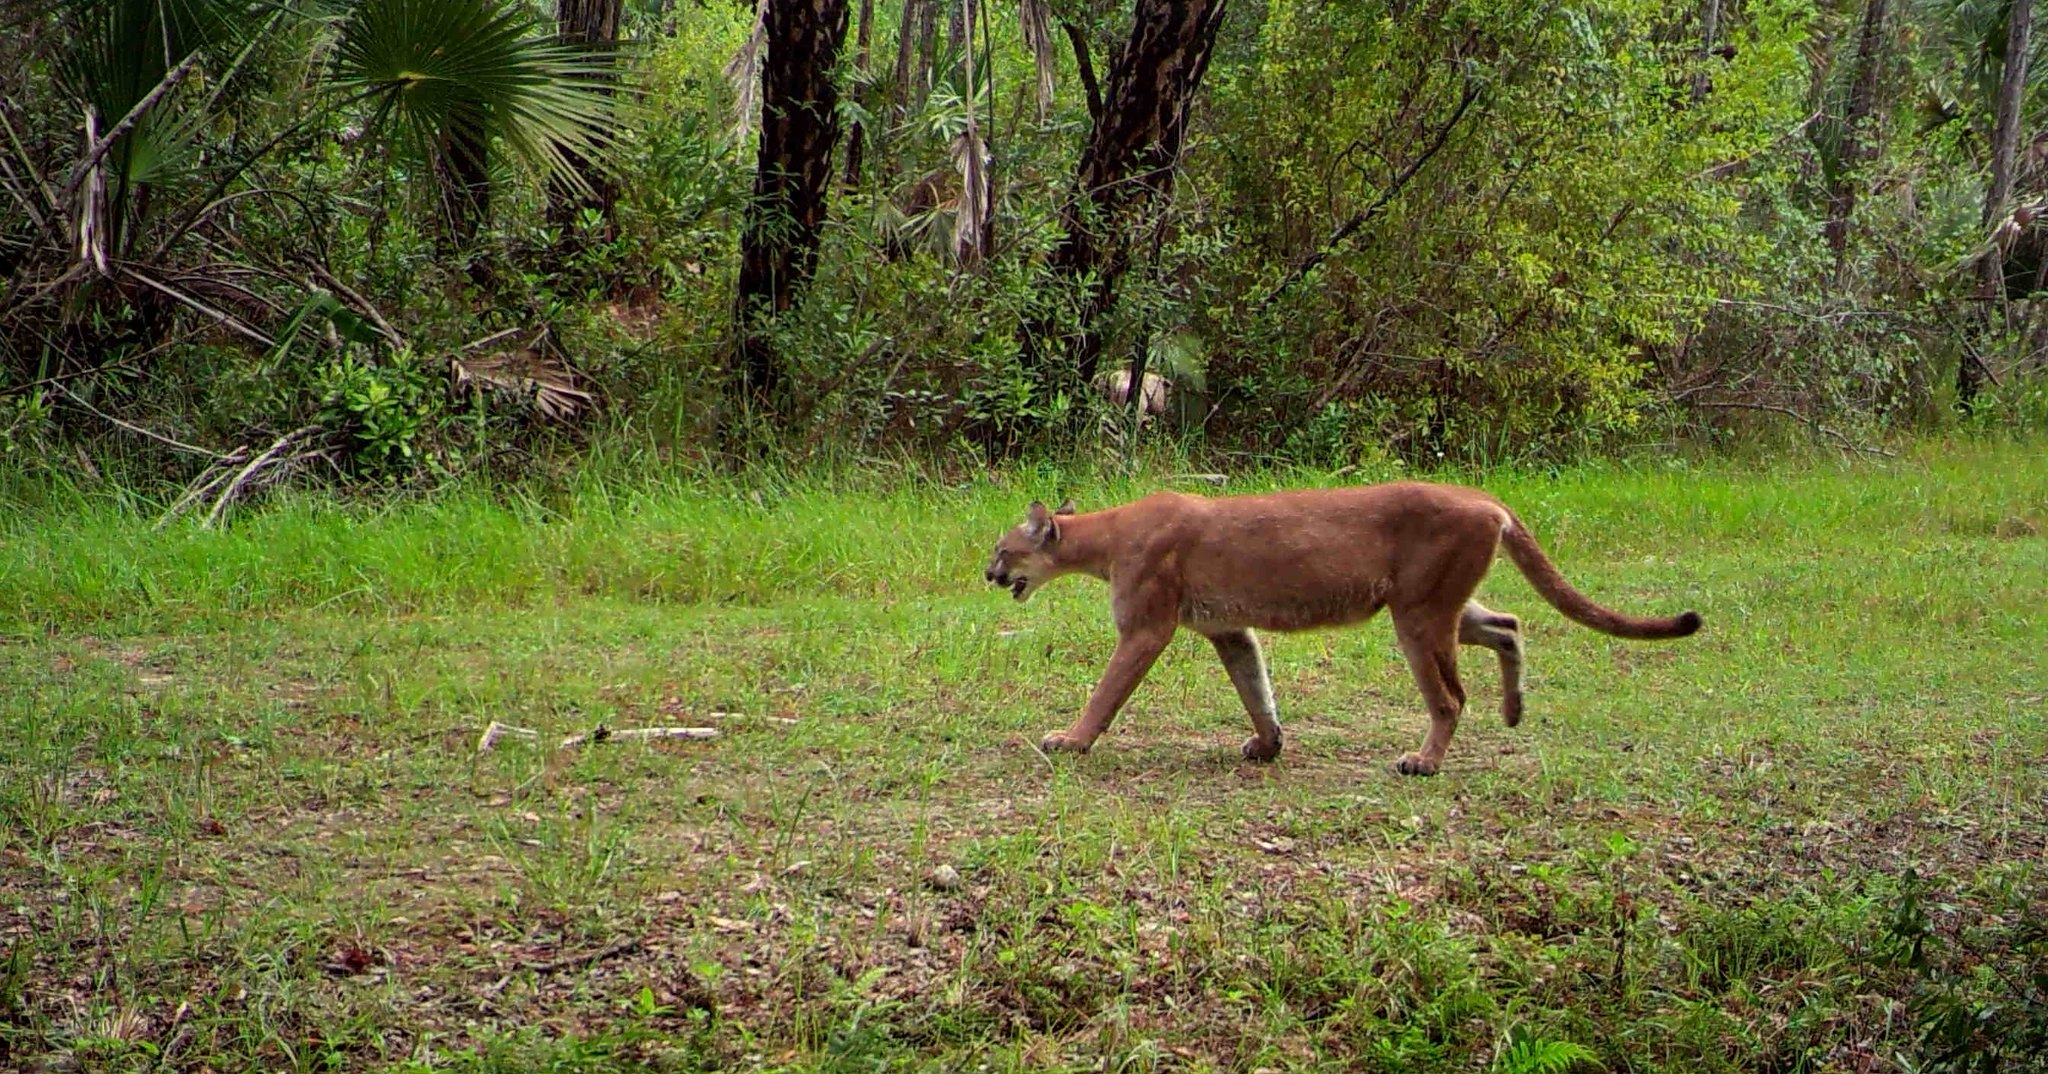 Florida panther (Puma concolor coryi). Image Credit: FWC Fish and Wildlife Research, Flickr Creative Commons.